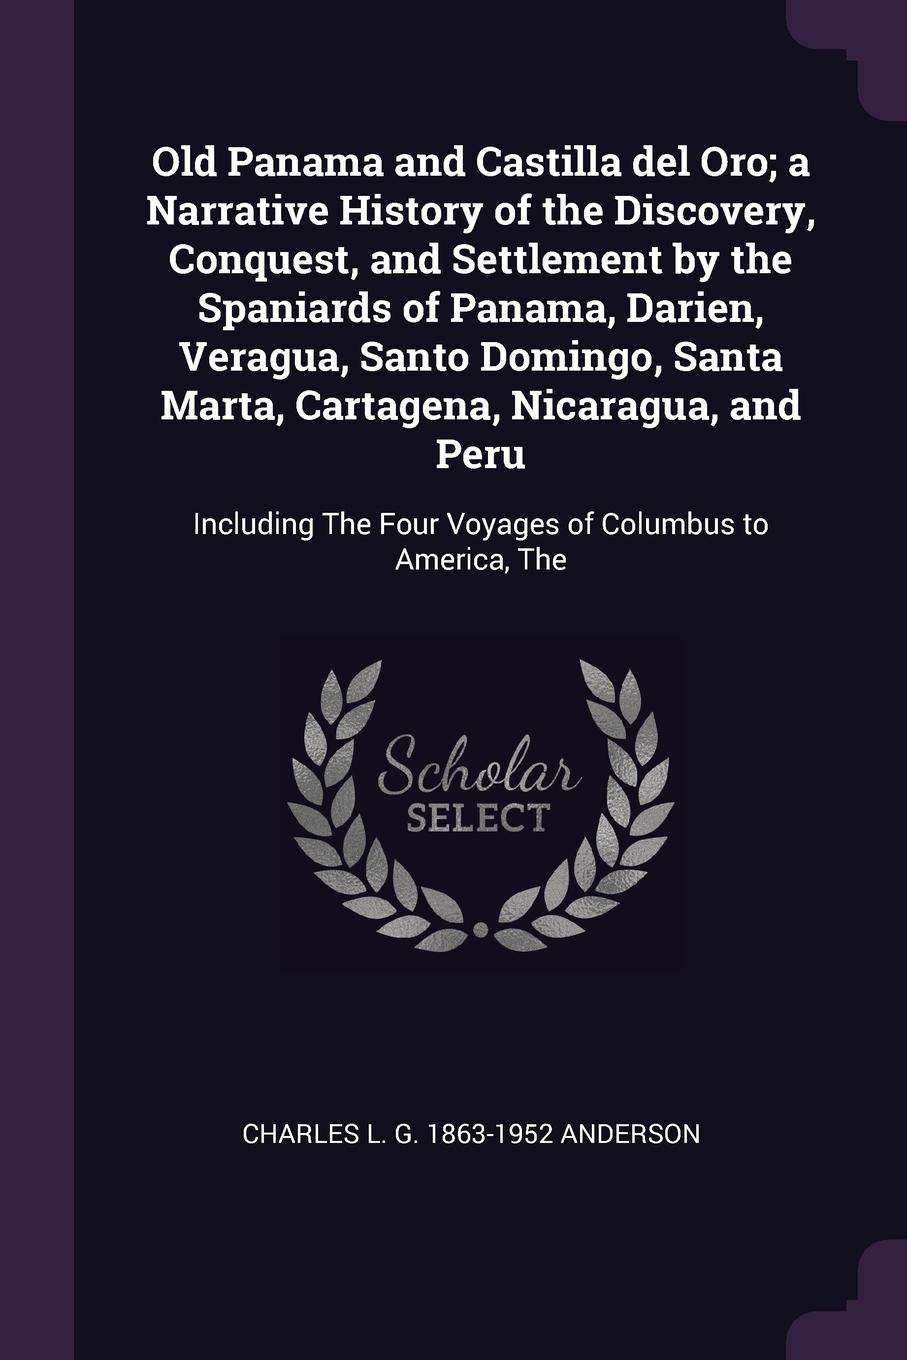 Old Panama and Castilla del Oro; a Narrative History of the Discovery, Conquest, and Settlement by the Spaniards of Panama, Darien, Veragua, Santo Domingo, Santa Marta, Cartagena, Nicaragua, and Peru. Including The Four Voyages of Columbus to Amer...